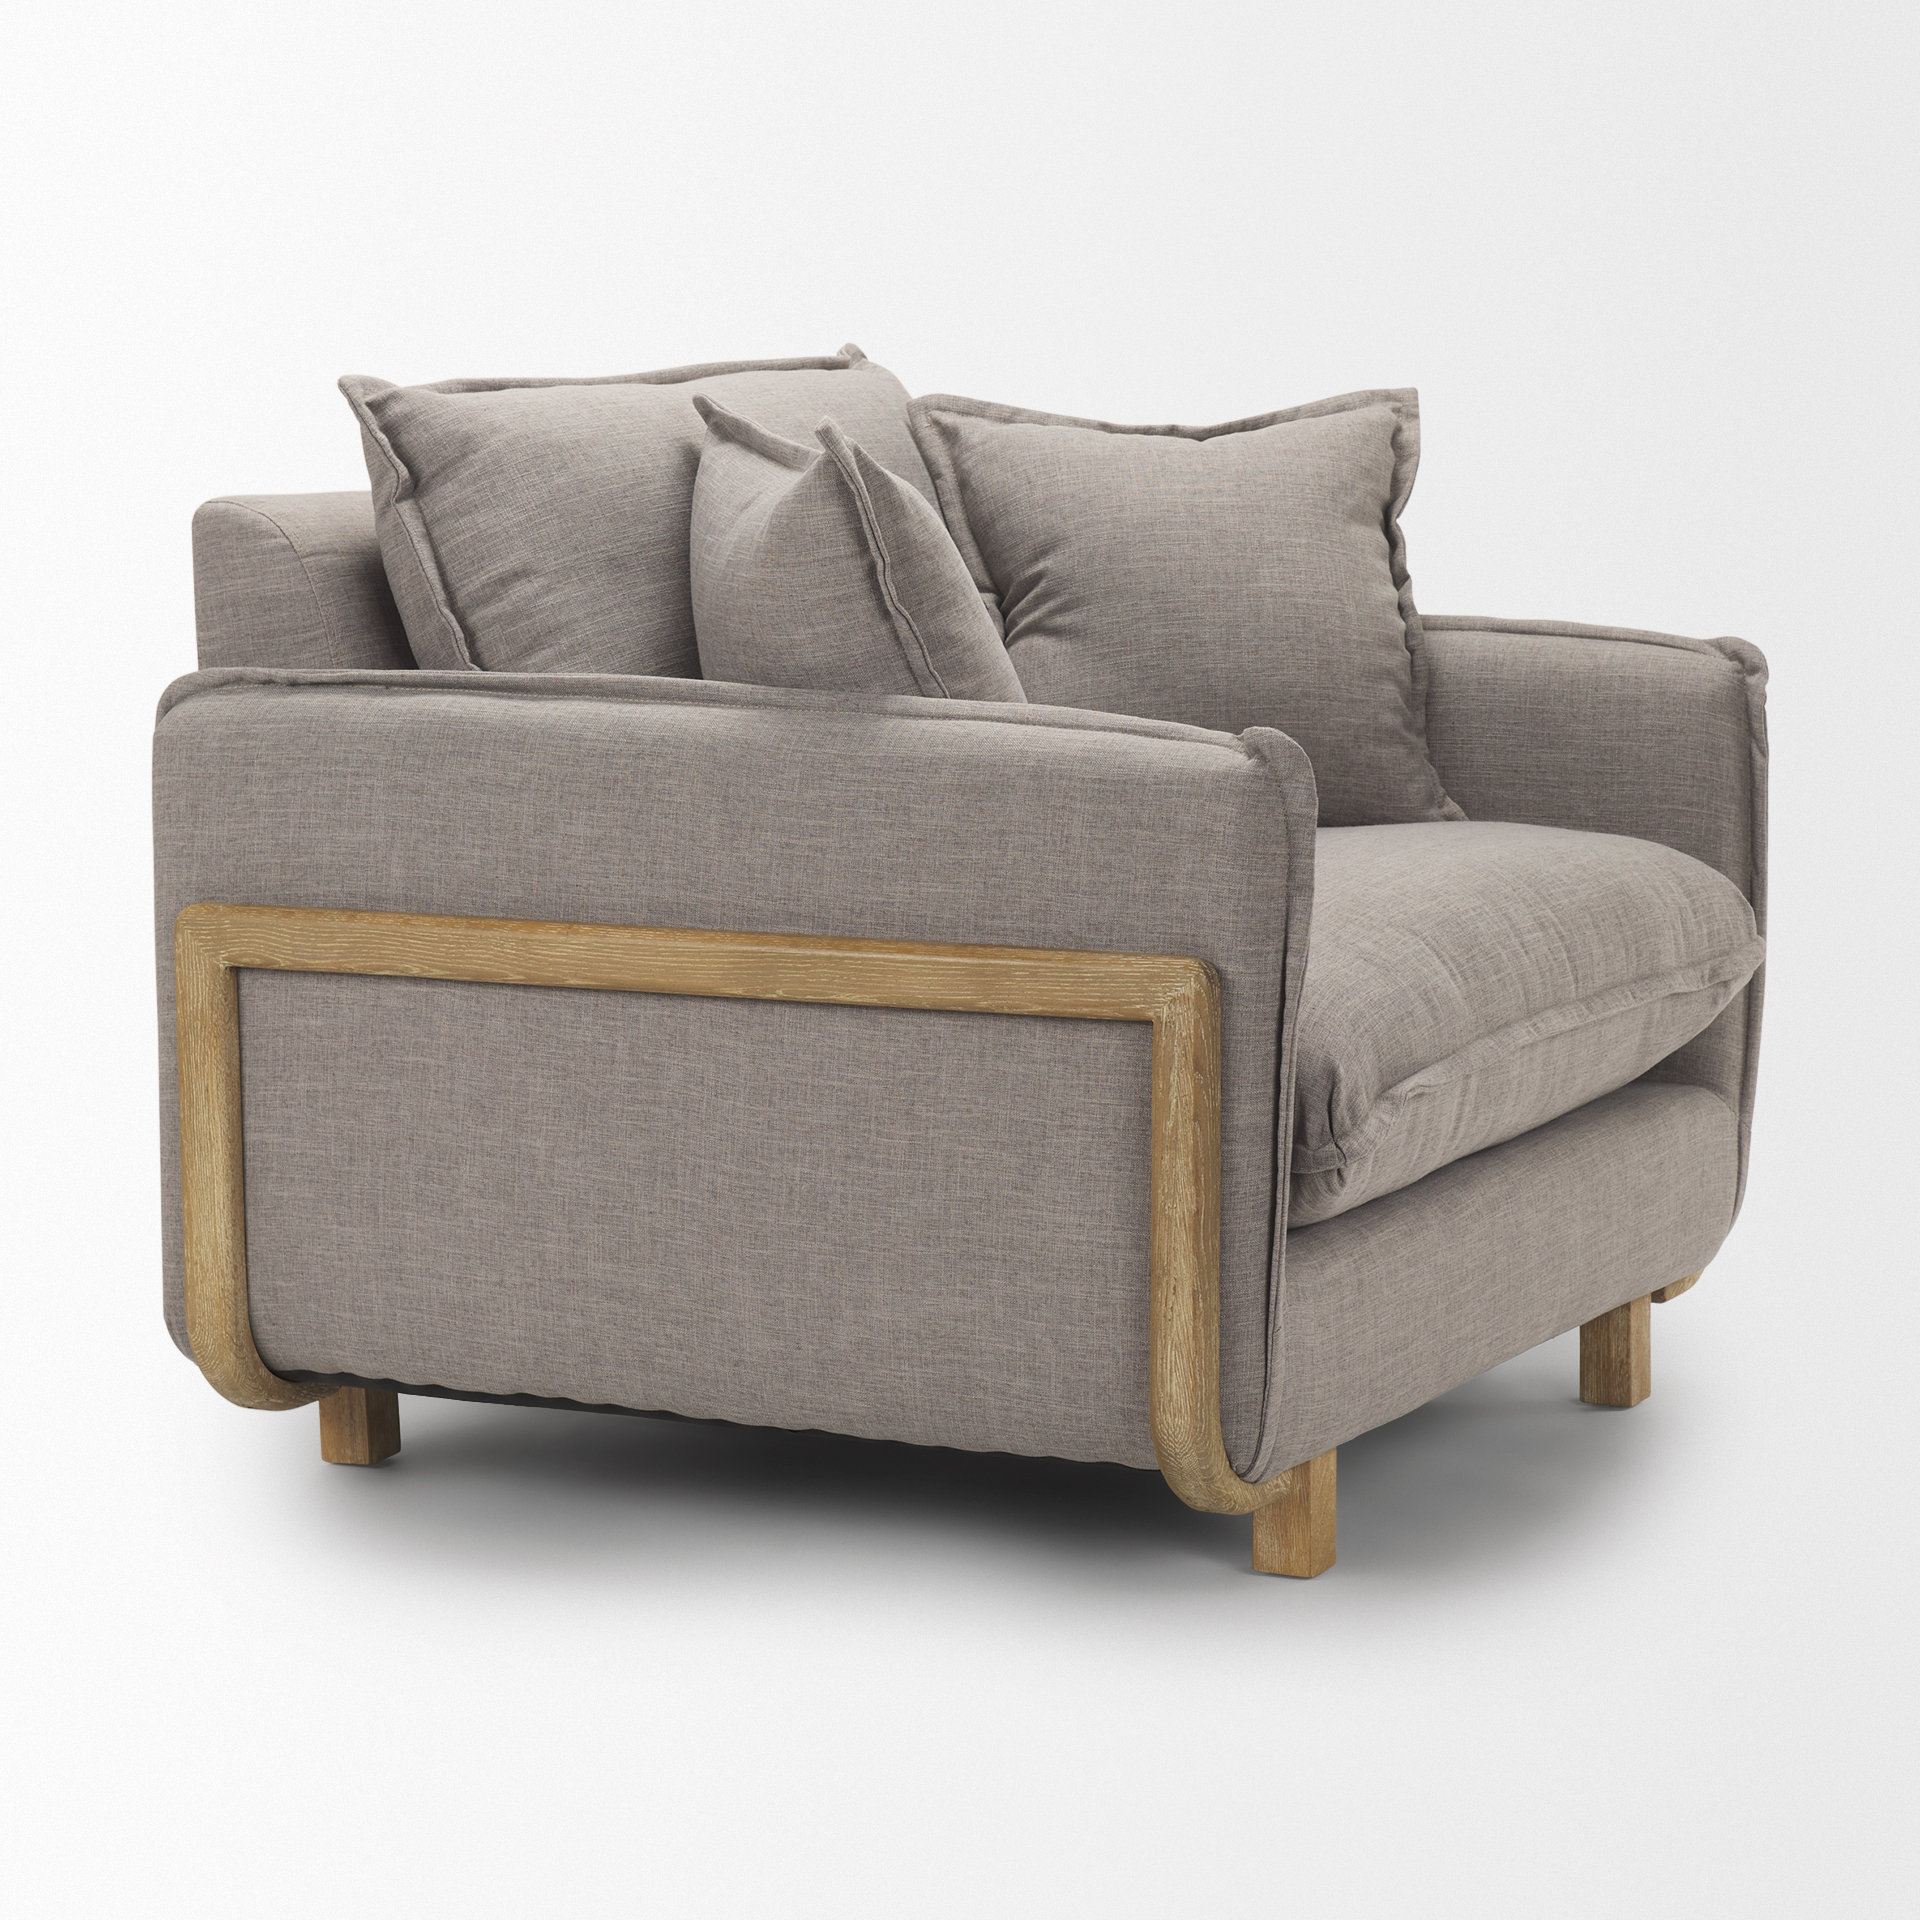 Rustic Reviews & Union Upholstered | Club Chair Wayfair Bruceville